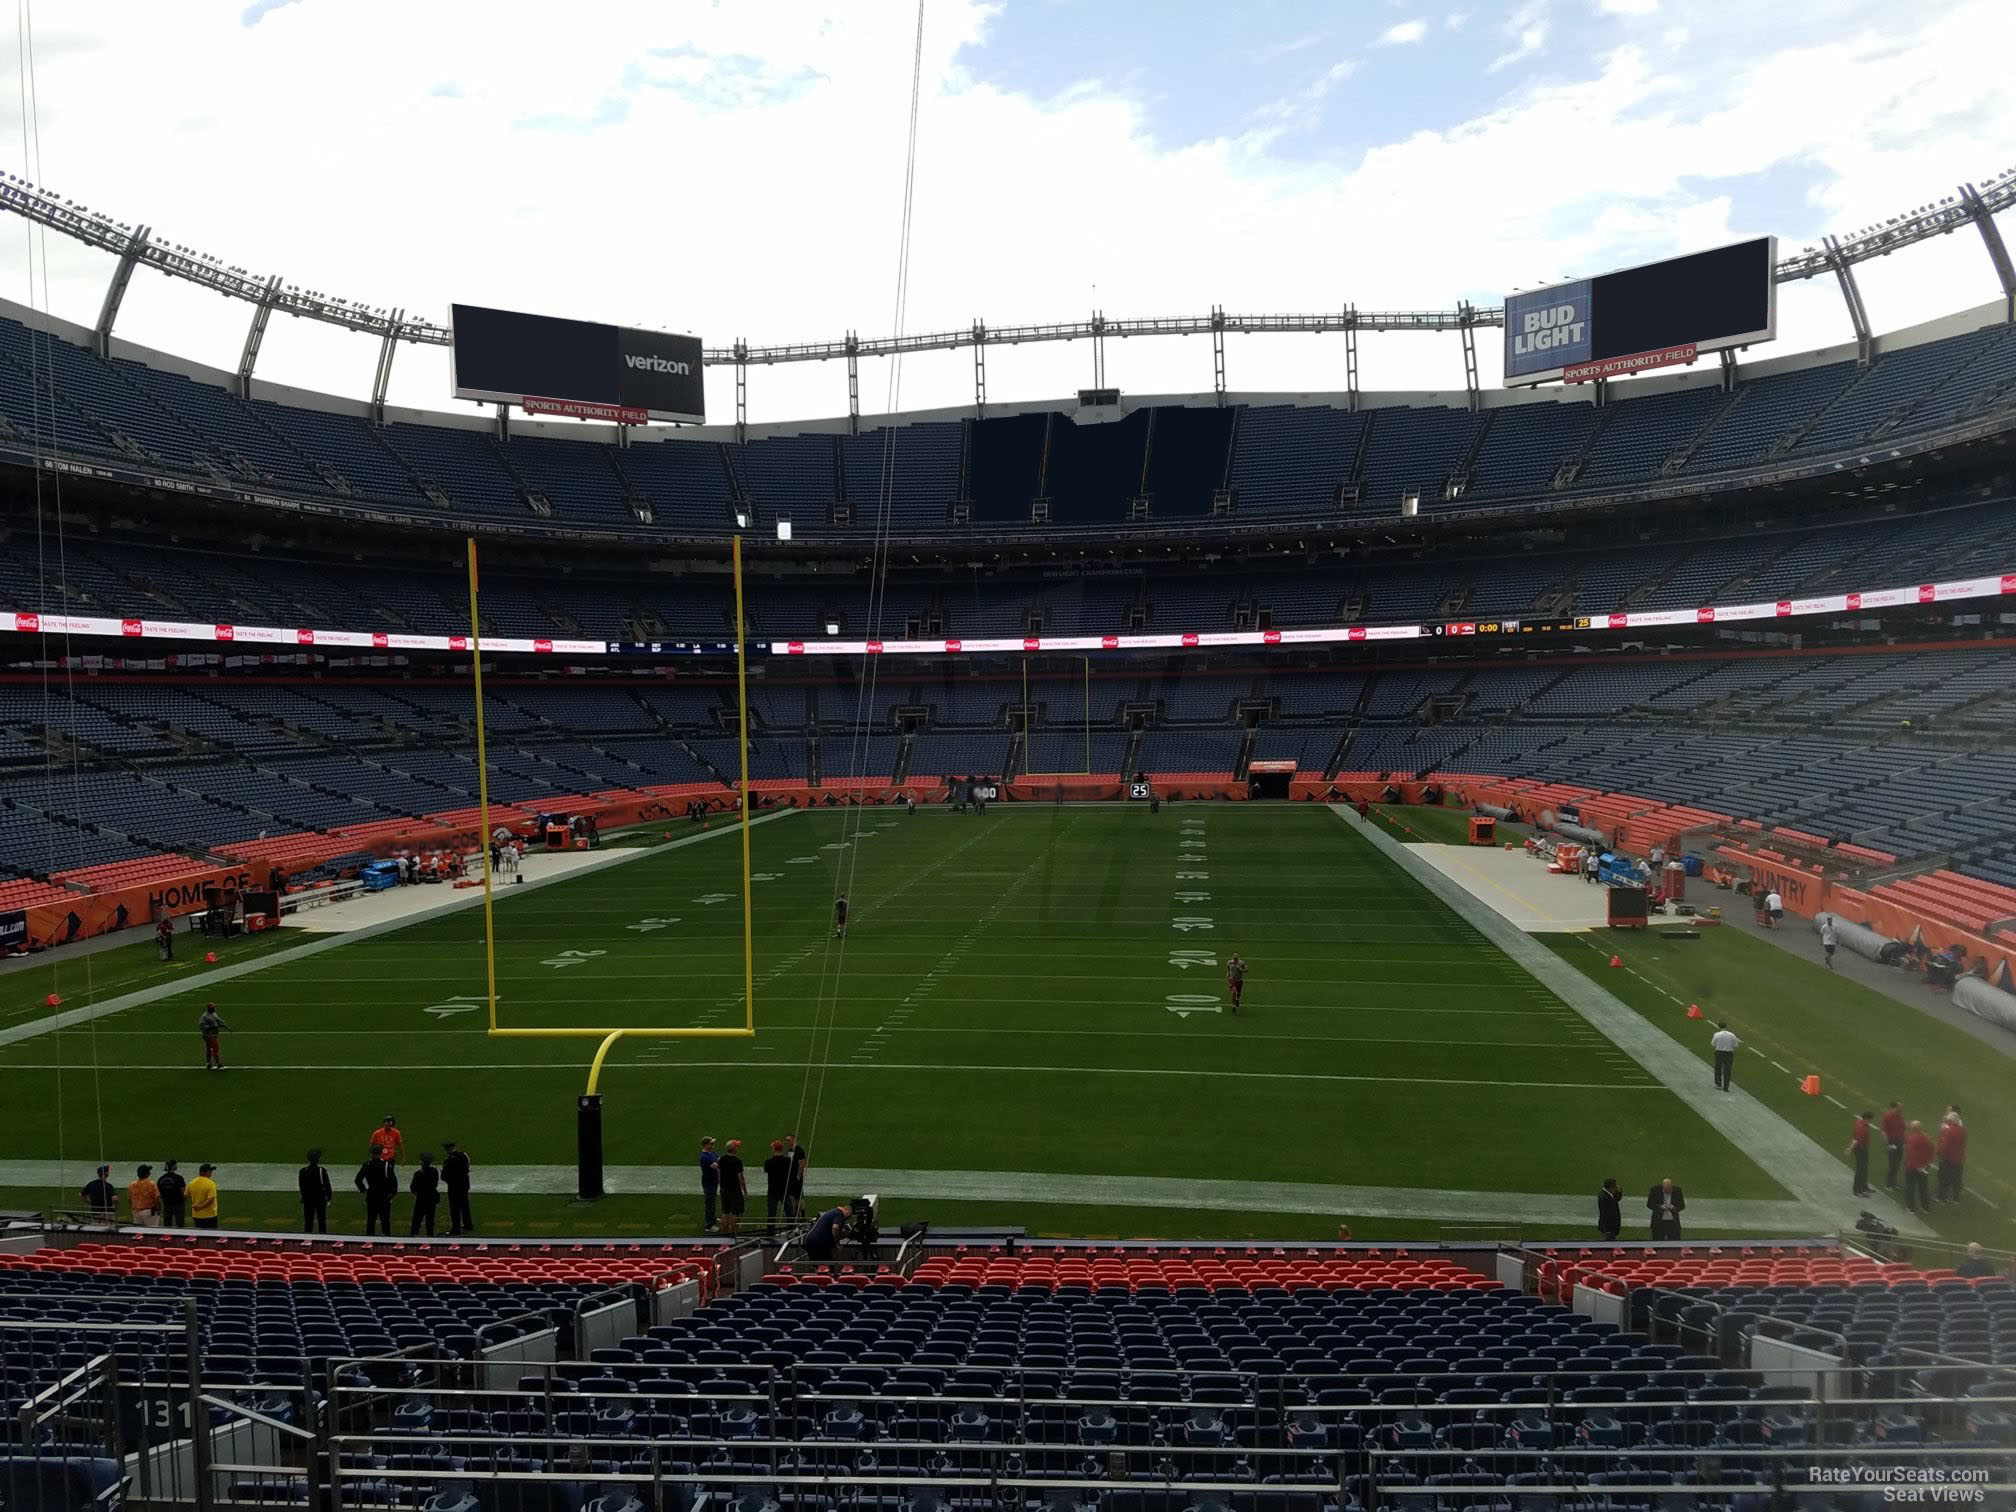 section 131, row 30 seat view  - empower field (at mile high)